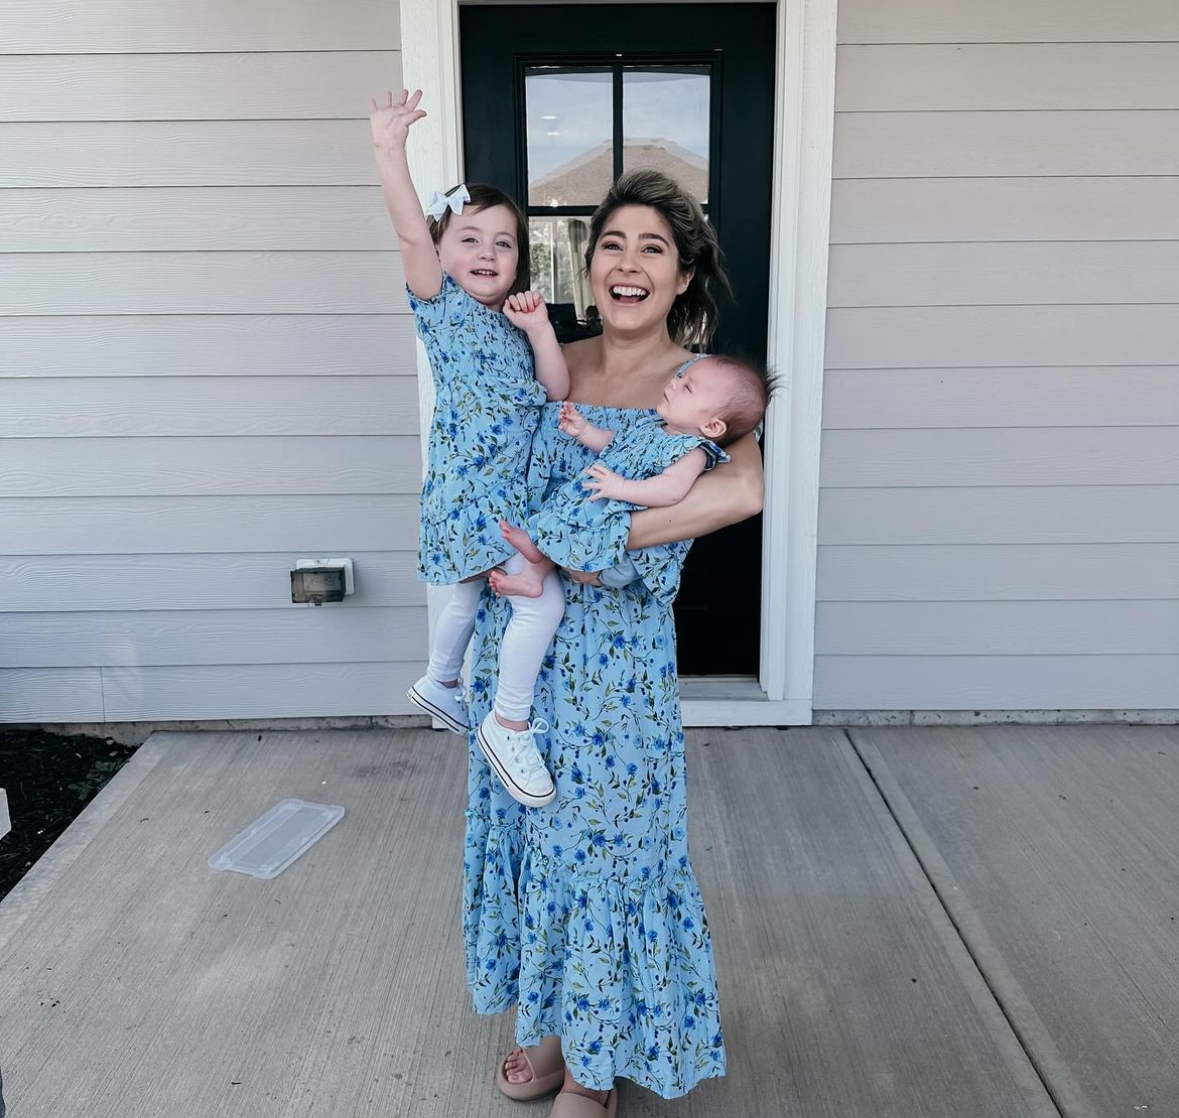 Time to celebrate Ashley – our amazing CEO! She juggles running Onya with being an amazing mom to her two daughters and a supportive wife to Dallas. Drop your birthday greetings and wishes for Ashley below – let's make her day! Happy Birthday, Ashley! 🎈🎊